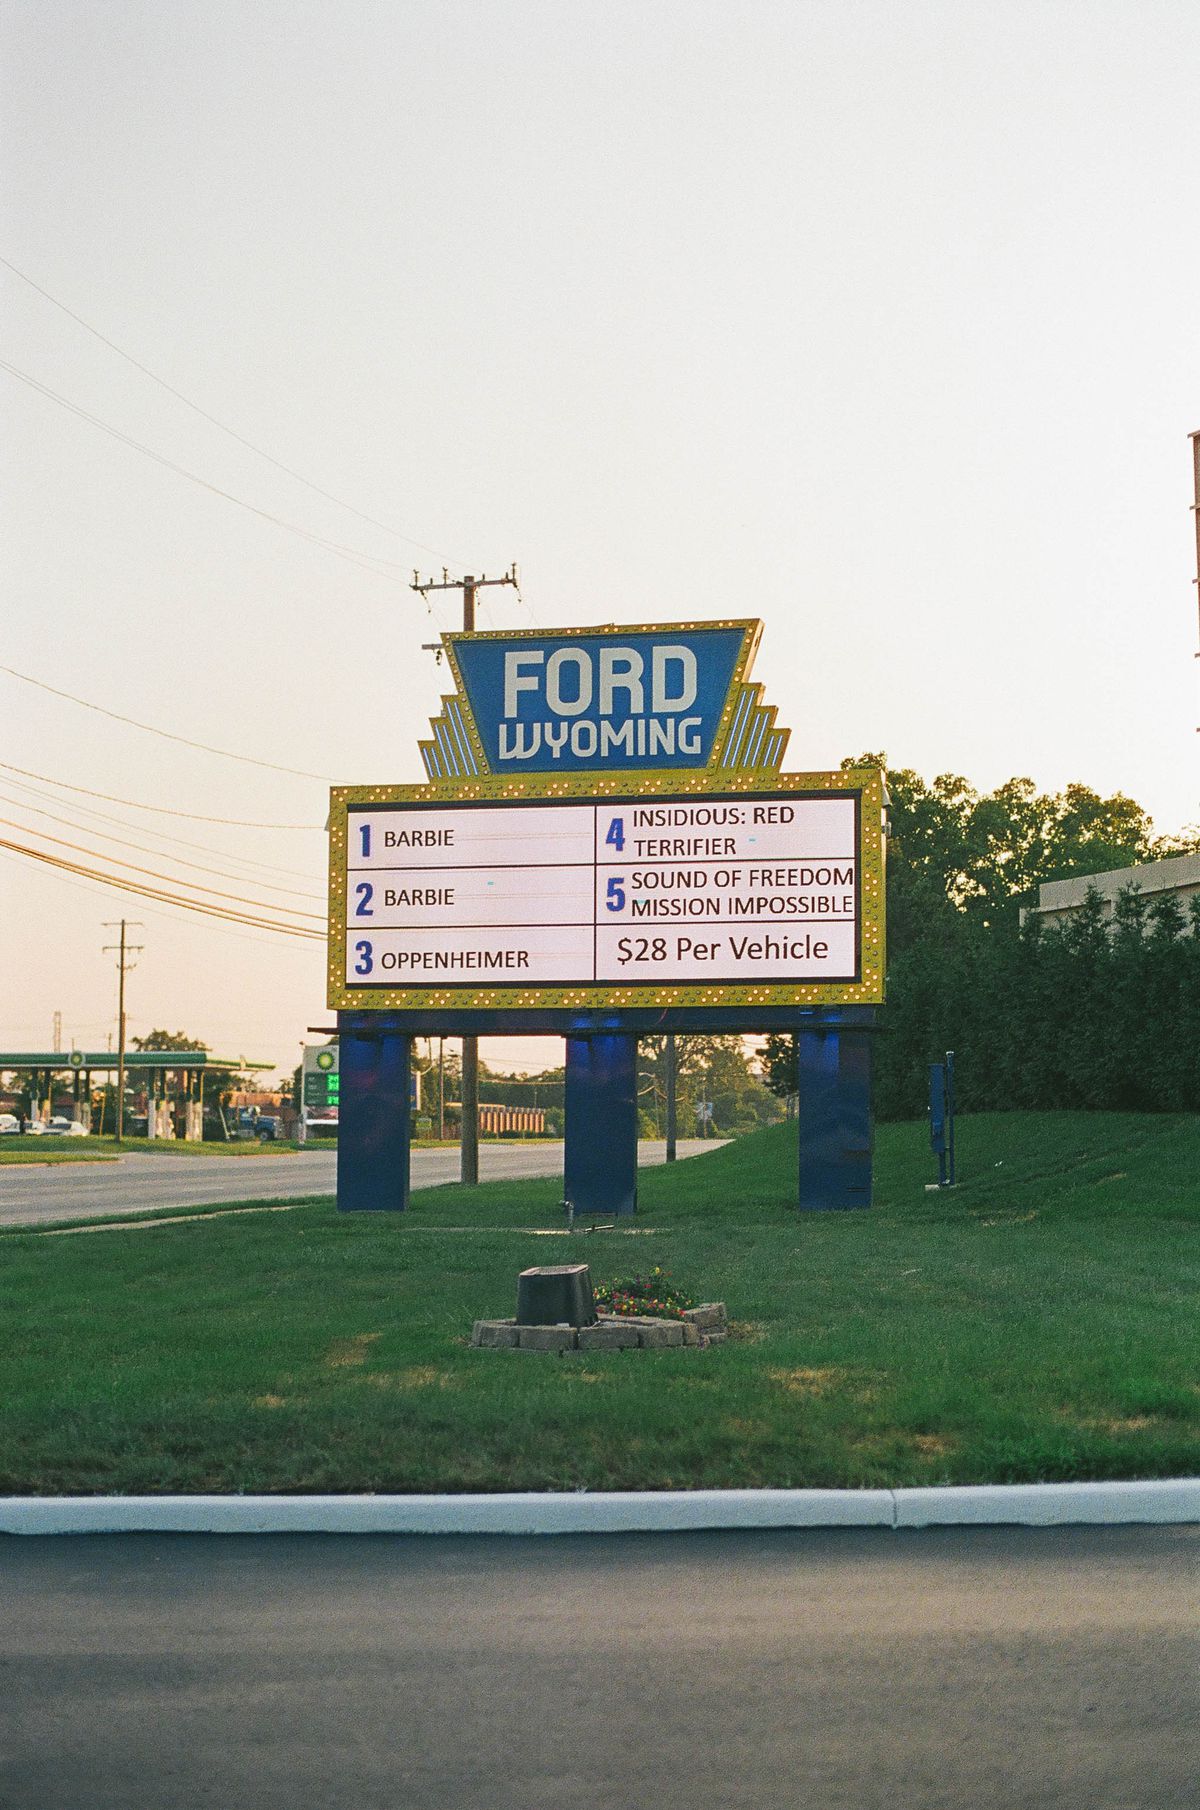 The marquee at the Ford Drive-In Theatre in Dearborn, Michigan.